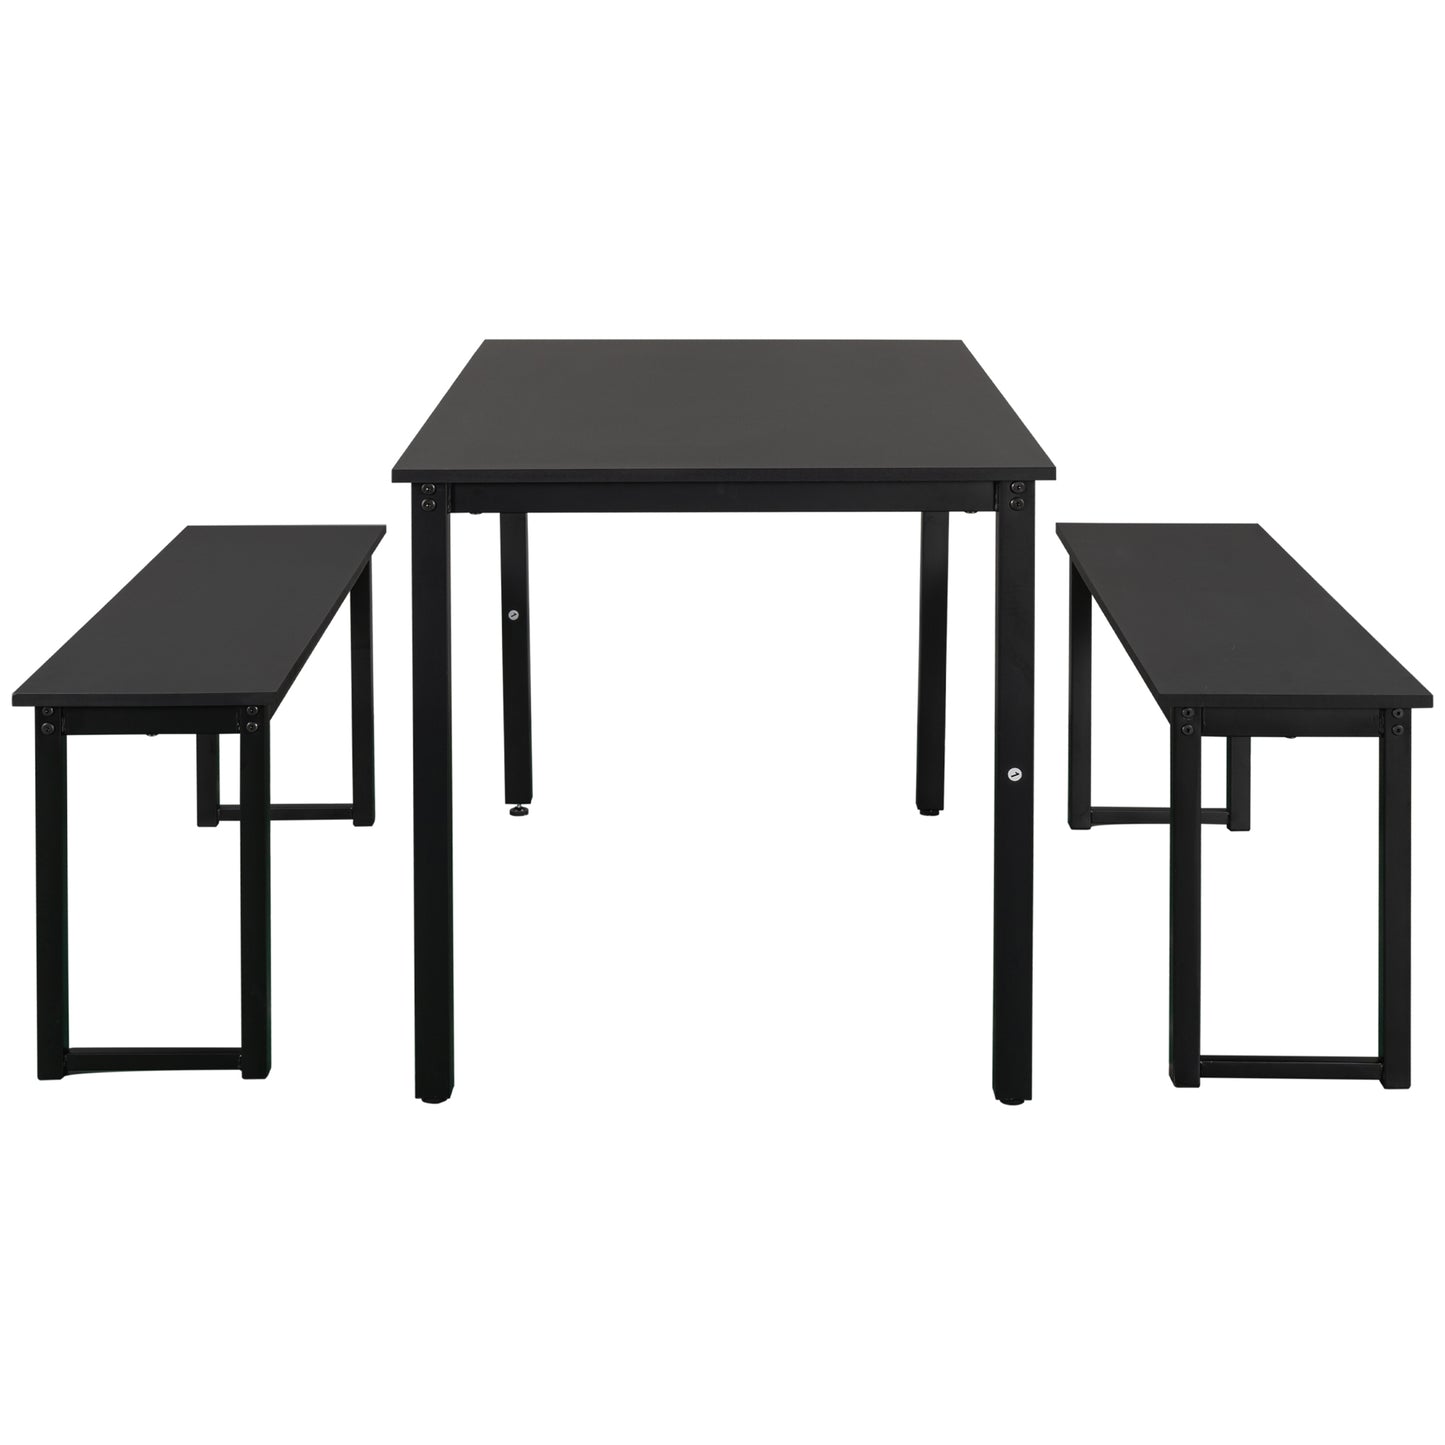 SYNGAR 3 Piece Dining Table Set, Modern Kitchen Table and Bench for 6, MDF Board Table Top and Metal Frame Kitchen Furniture Set, Breakfast Nook Table with 2 Benches for Home Apartment Office, B1207